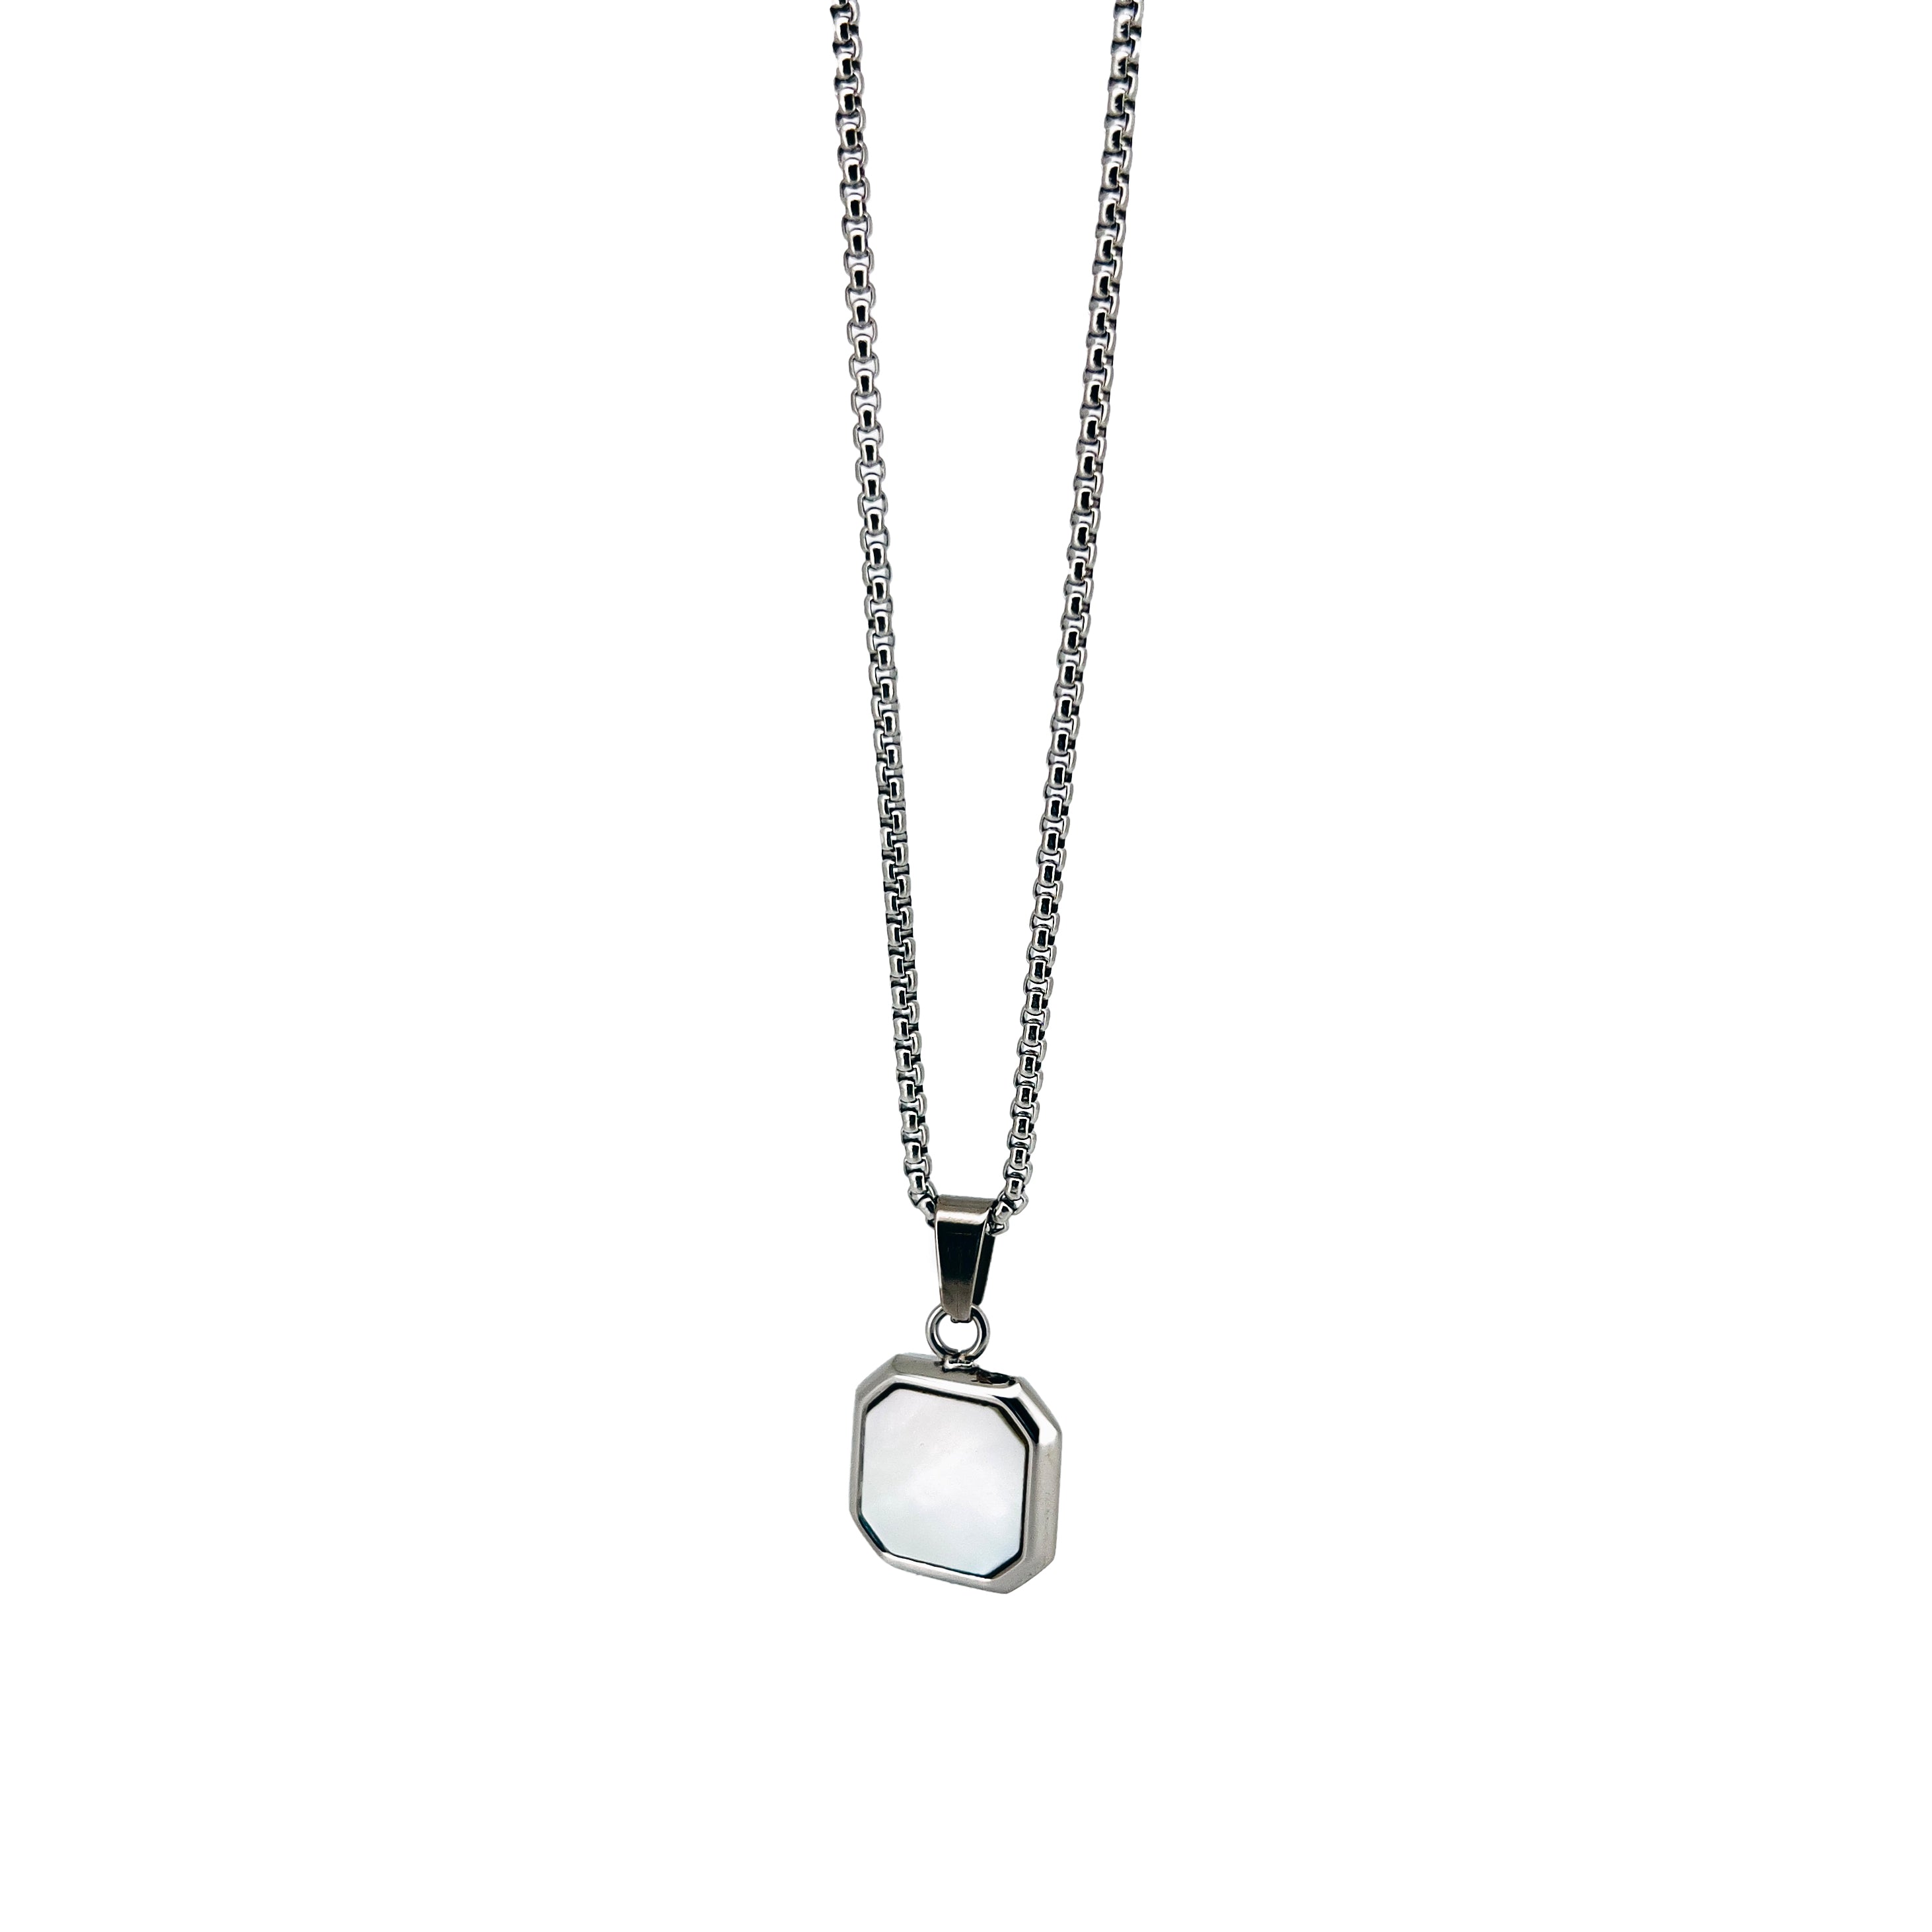 Carito Stainless Steel Box Chain Necklace with Square Stone Pendant